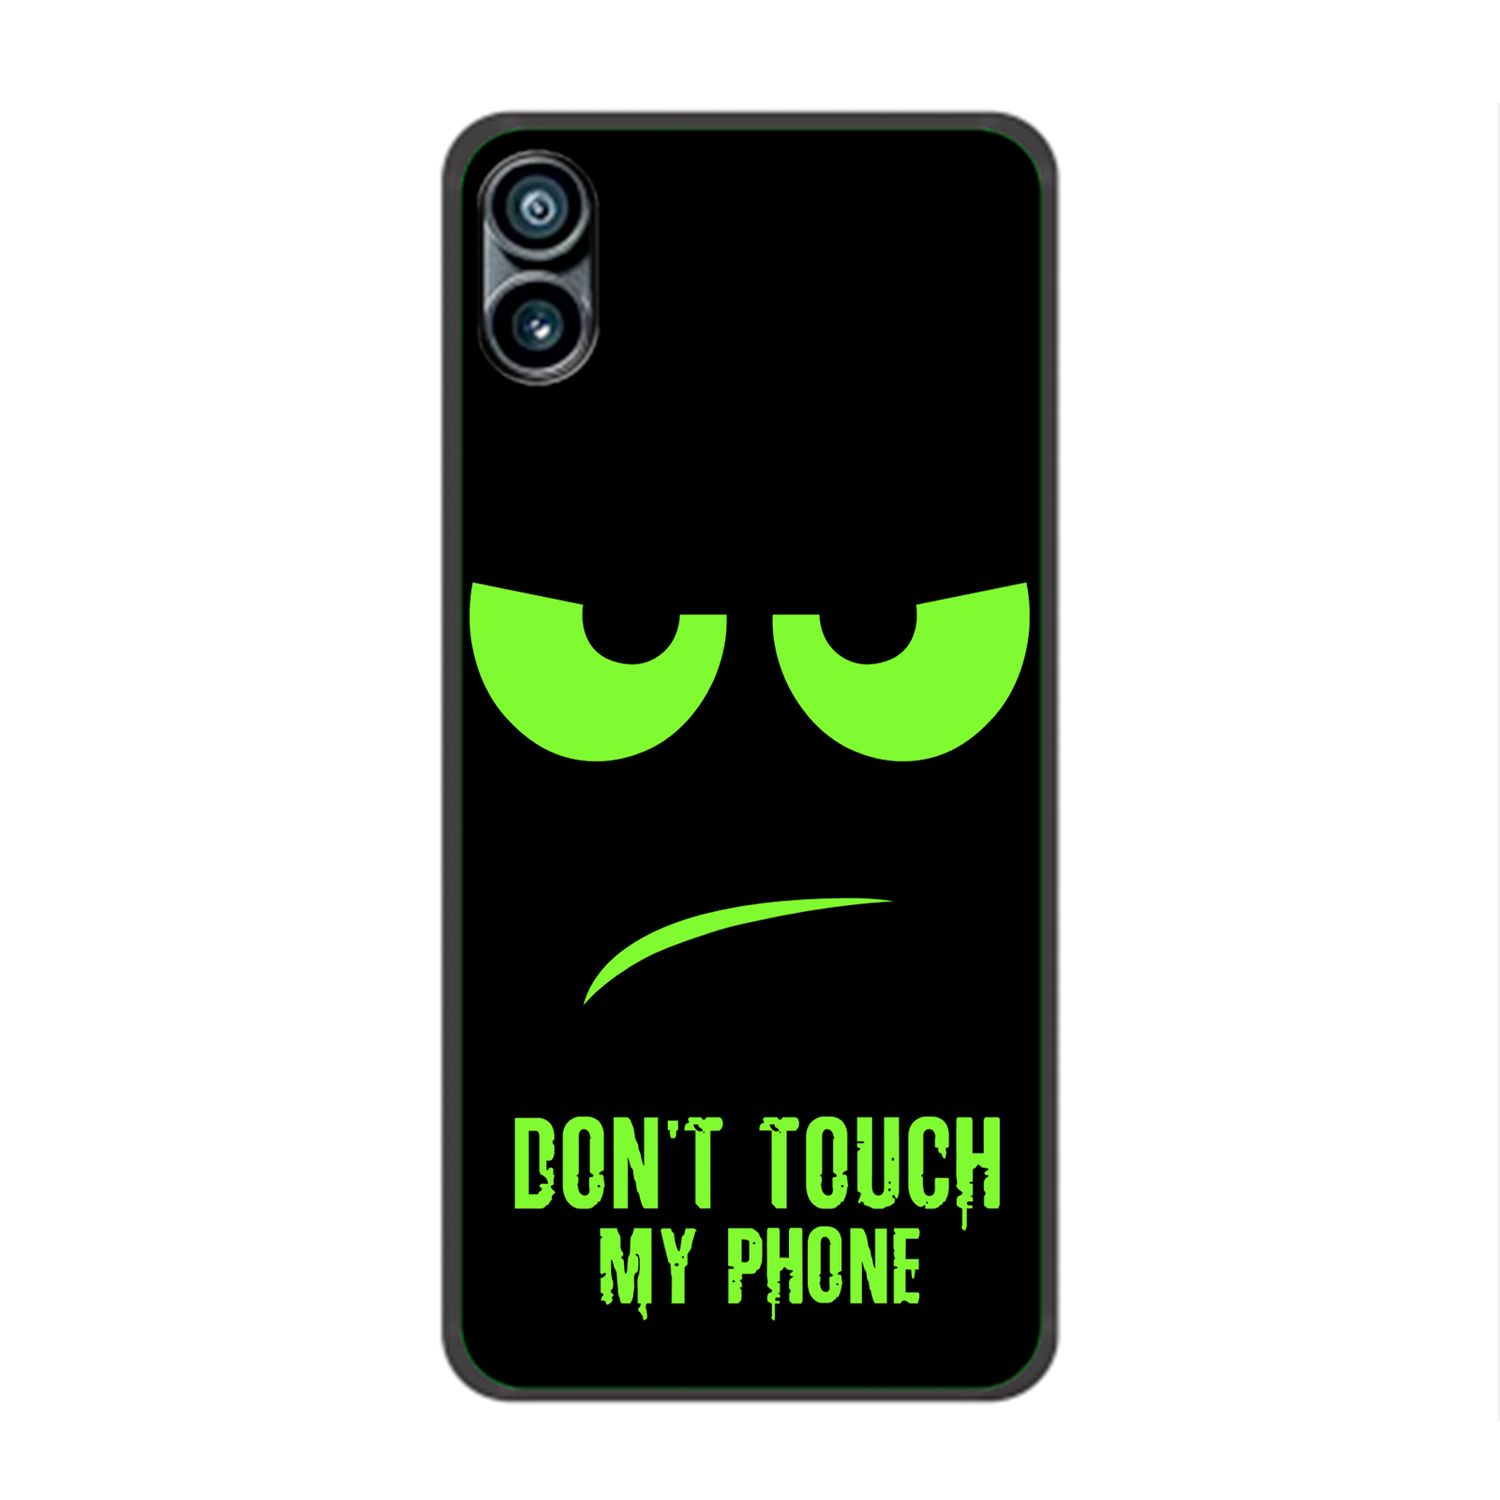 KÖNIG DESIGN Case, Backcover, Nothing, Grün Dont Phone Phone 1, Touch My